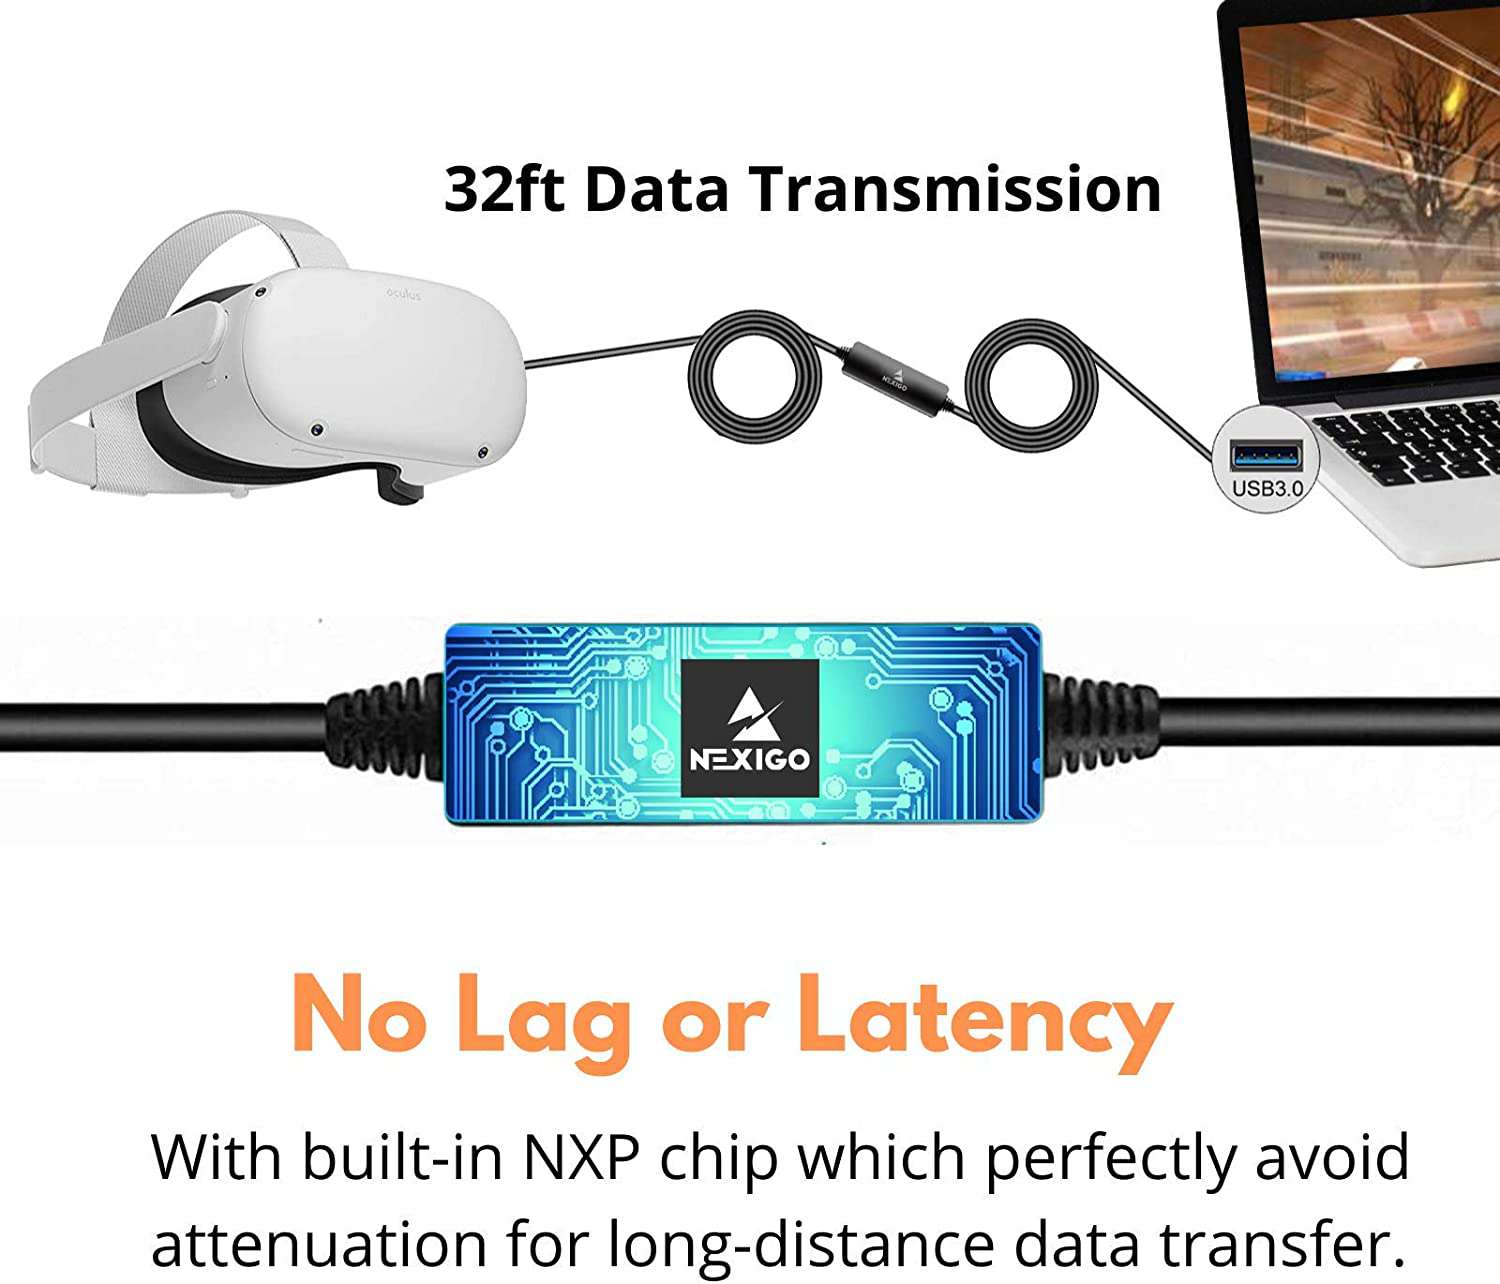 32ft cable with NXP chip for lag-free long-distance data transfer.